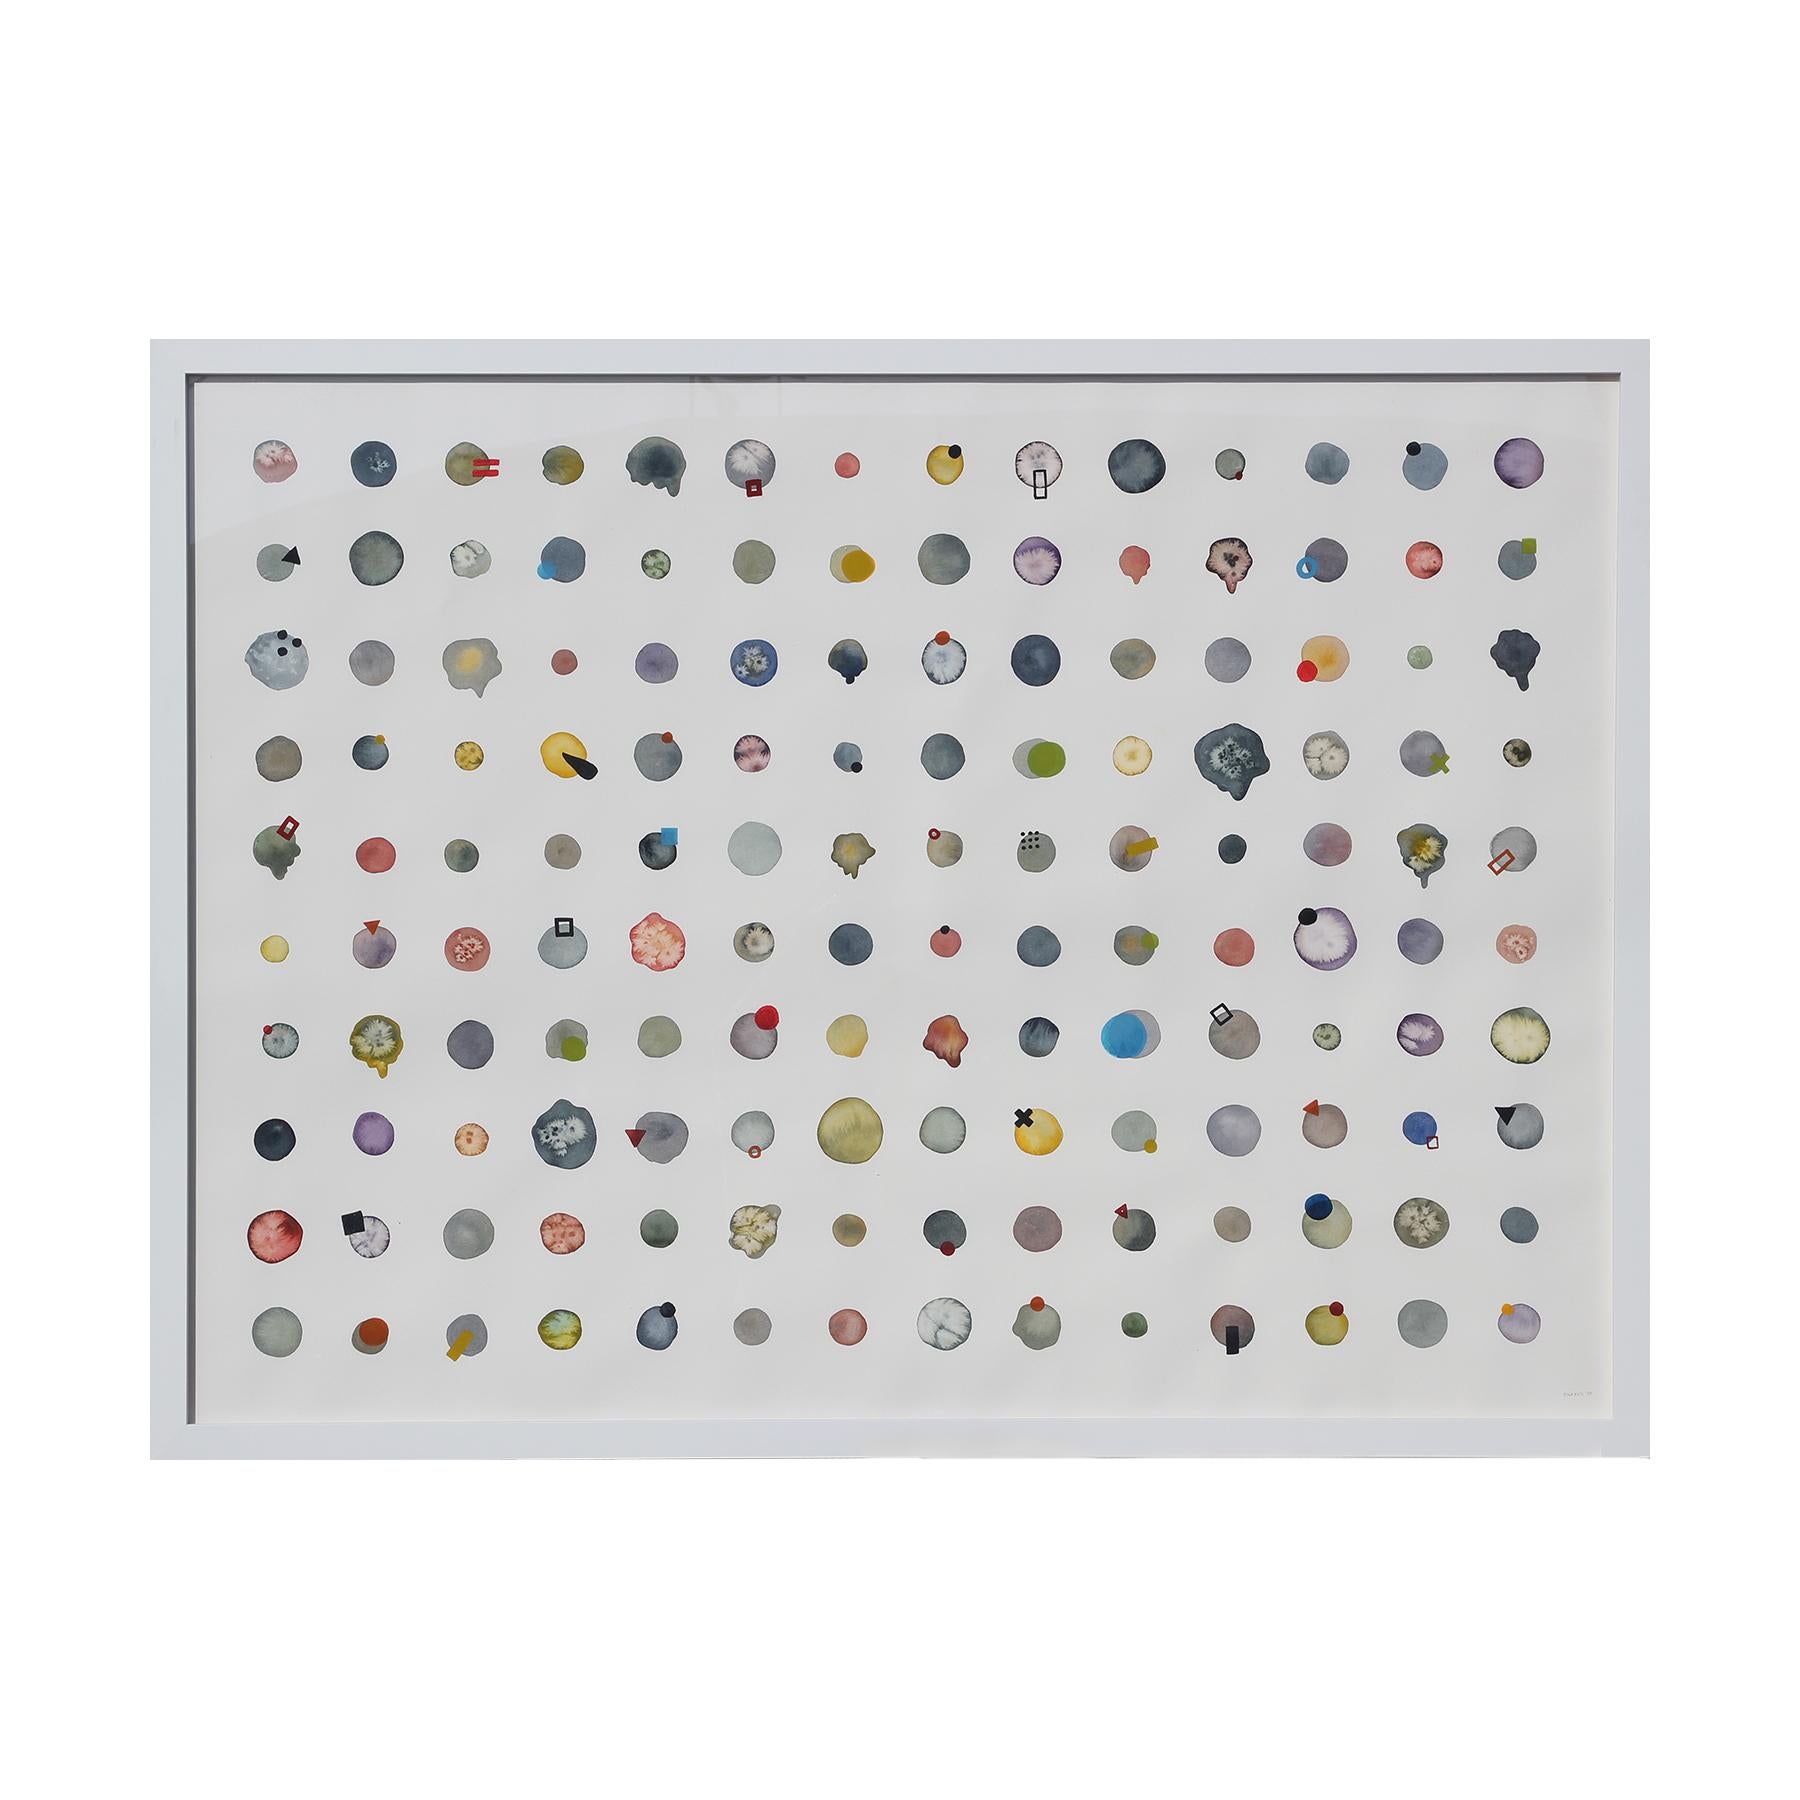 Tina Ruyi Abstract Drawing - "Little Dots #3" Watercolor Dot Grid with Geometric Organic Forms Painting 